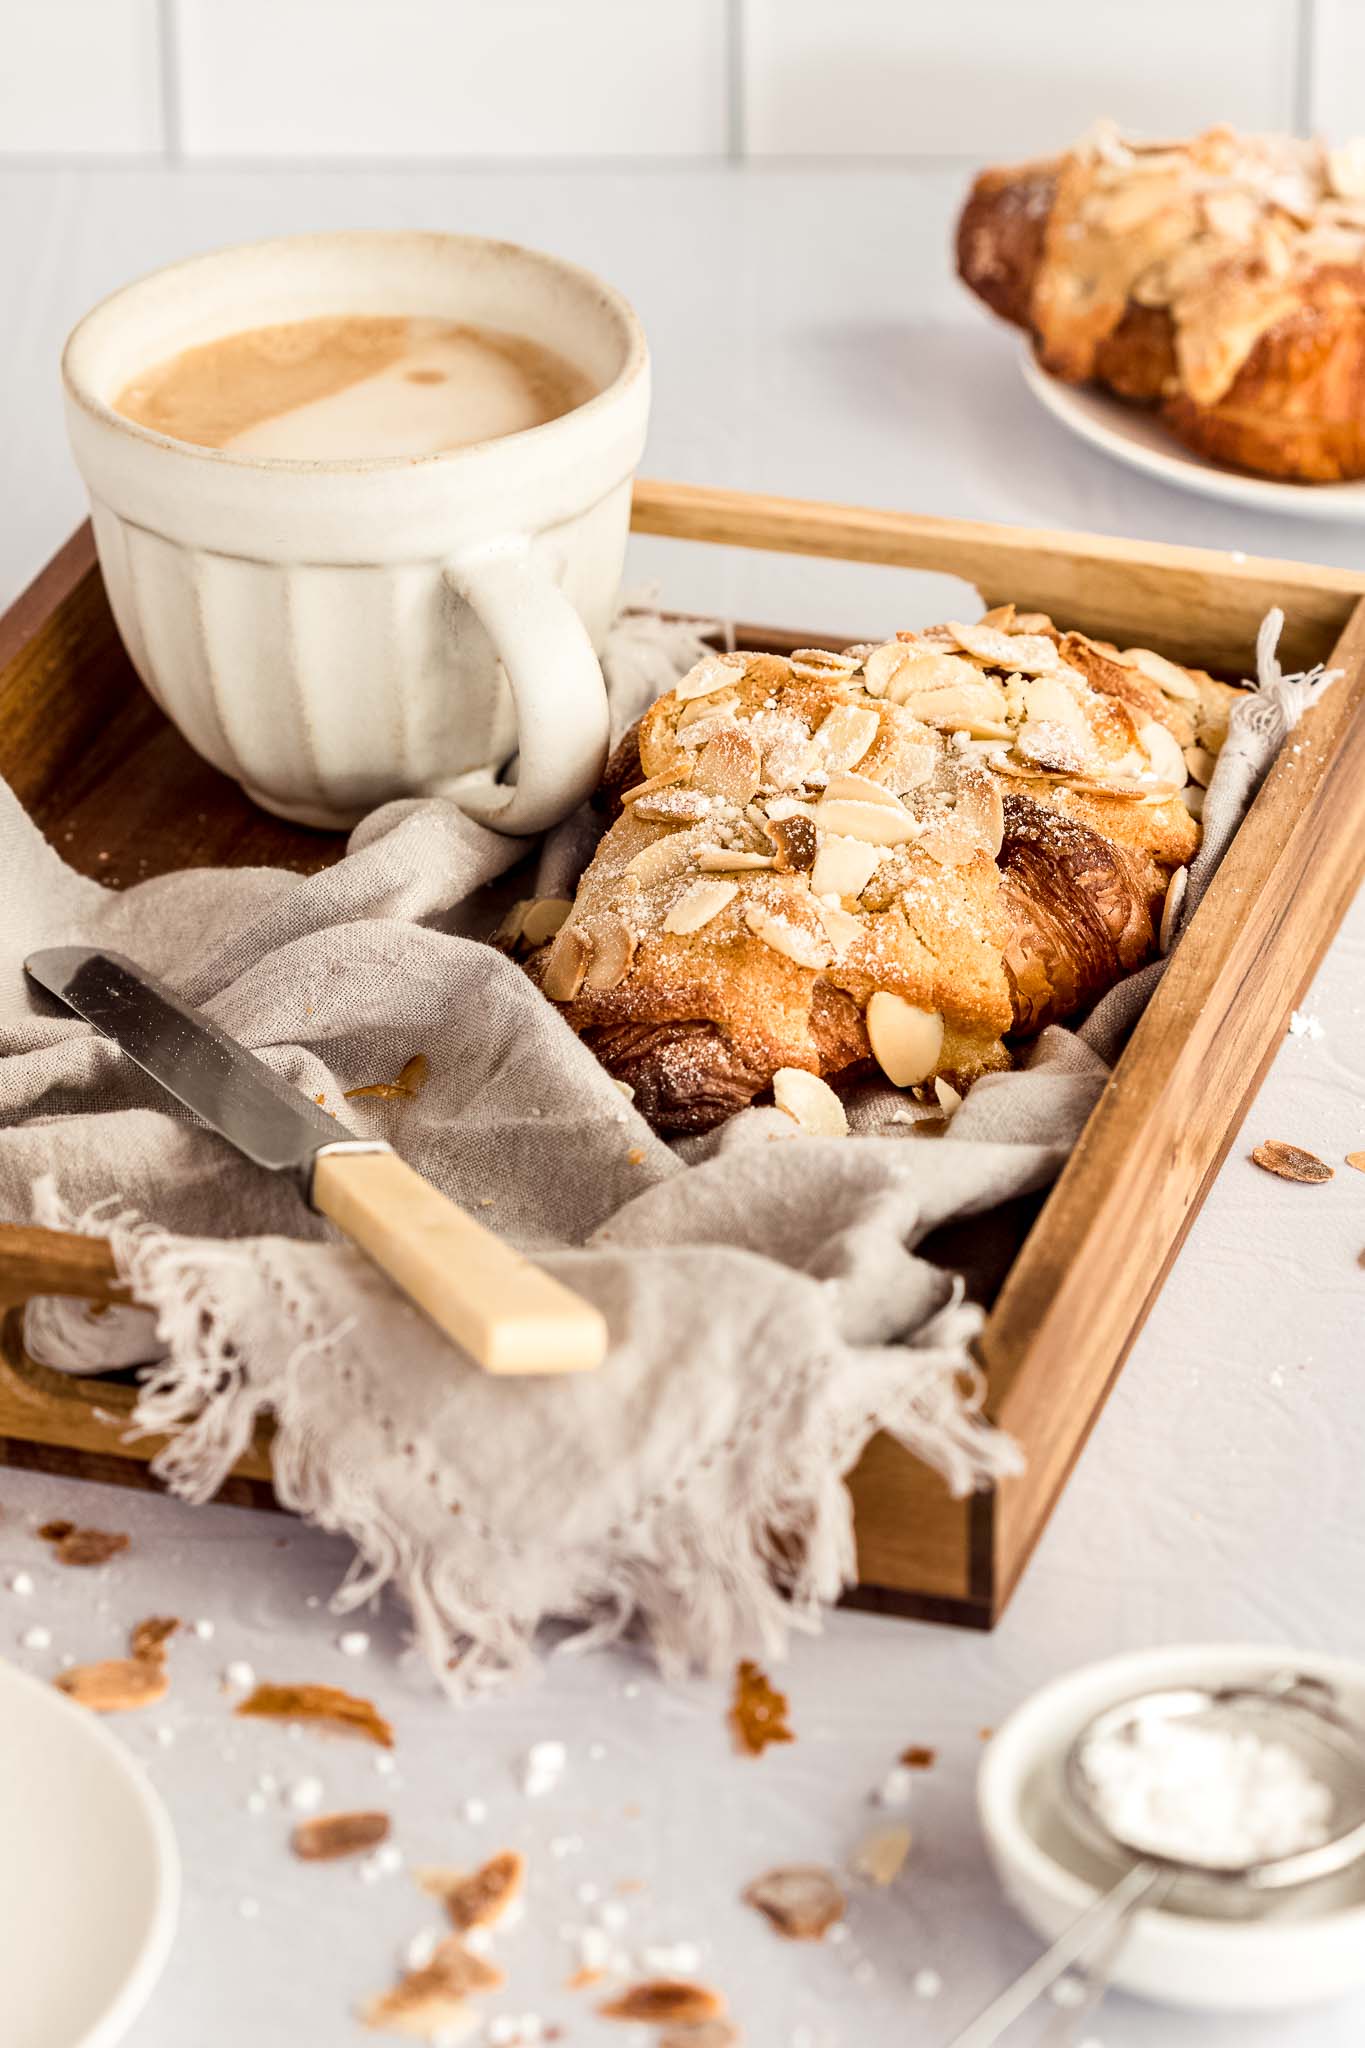 almond croissant on a tray with a knife and a coffee